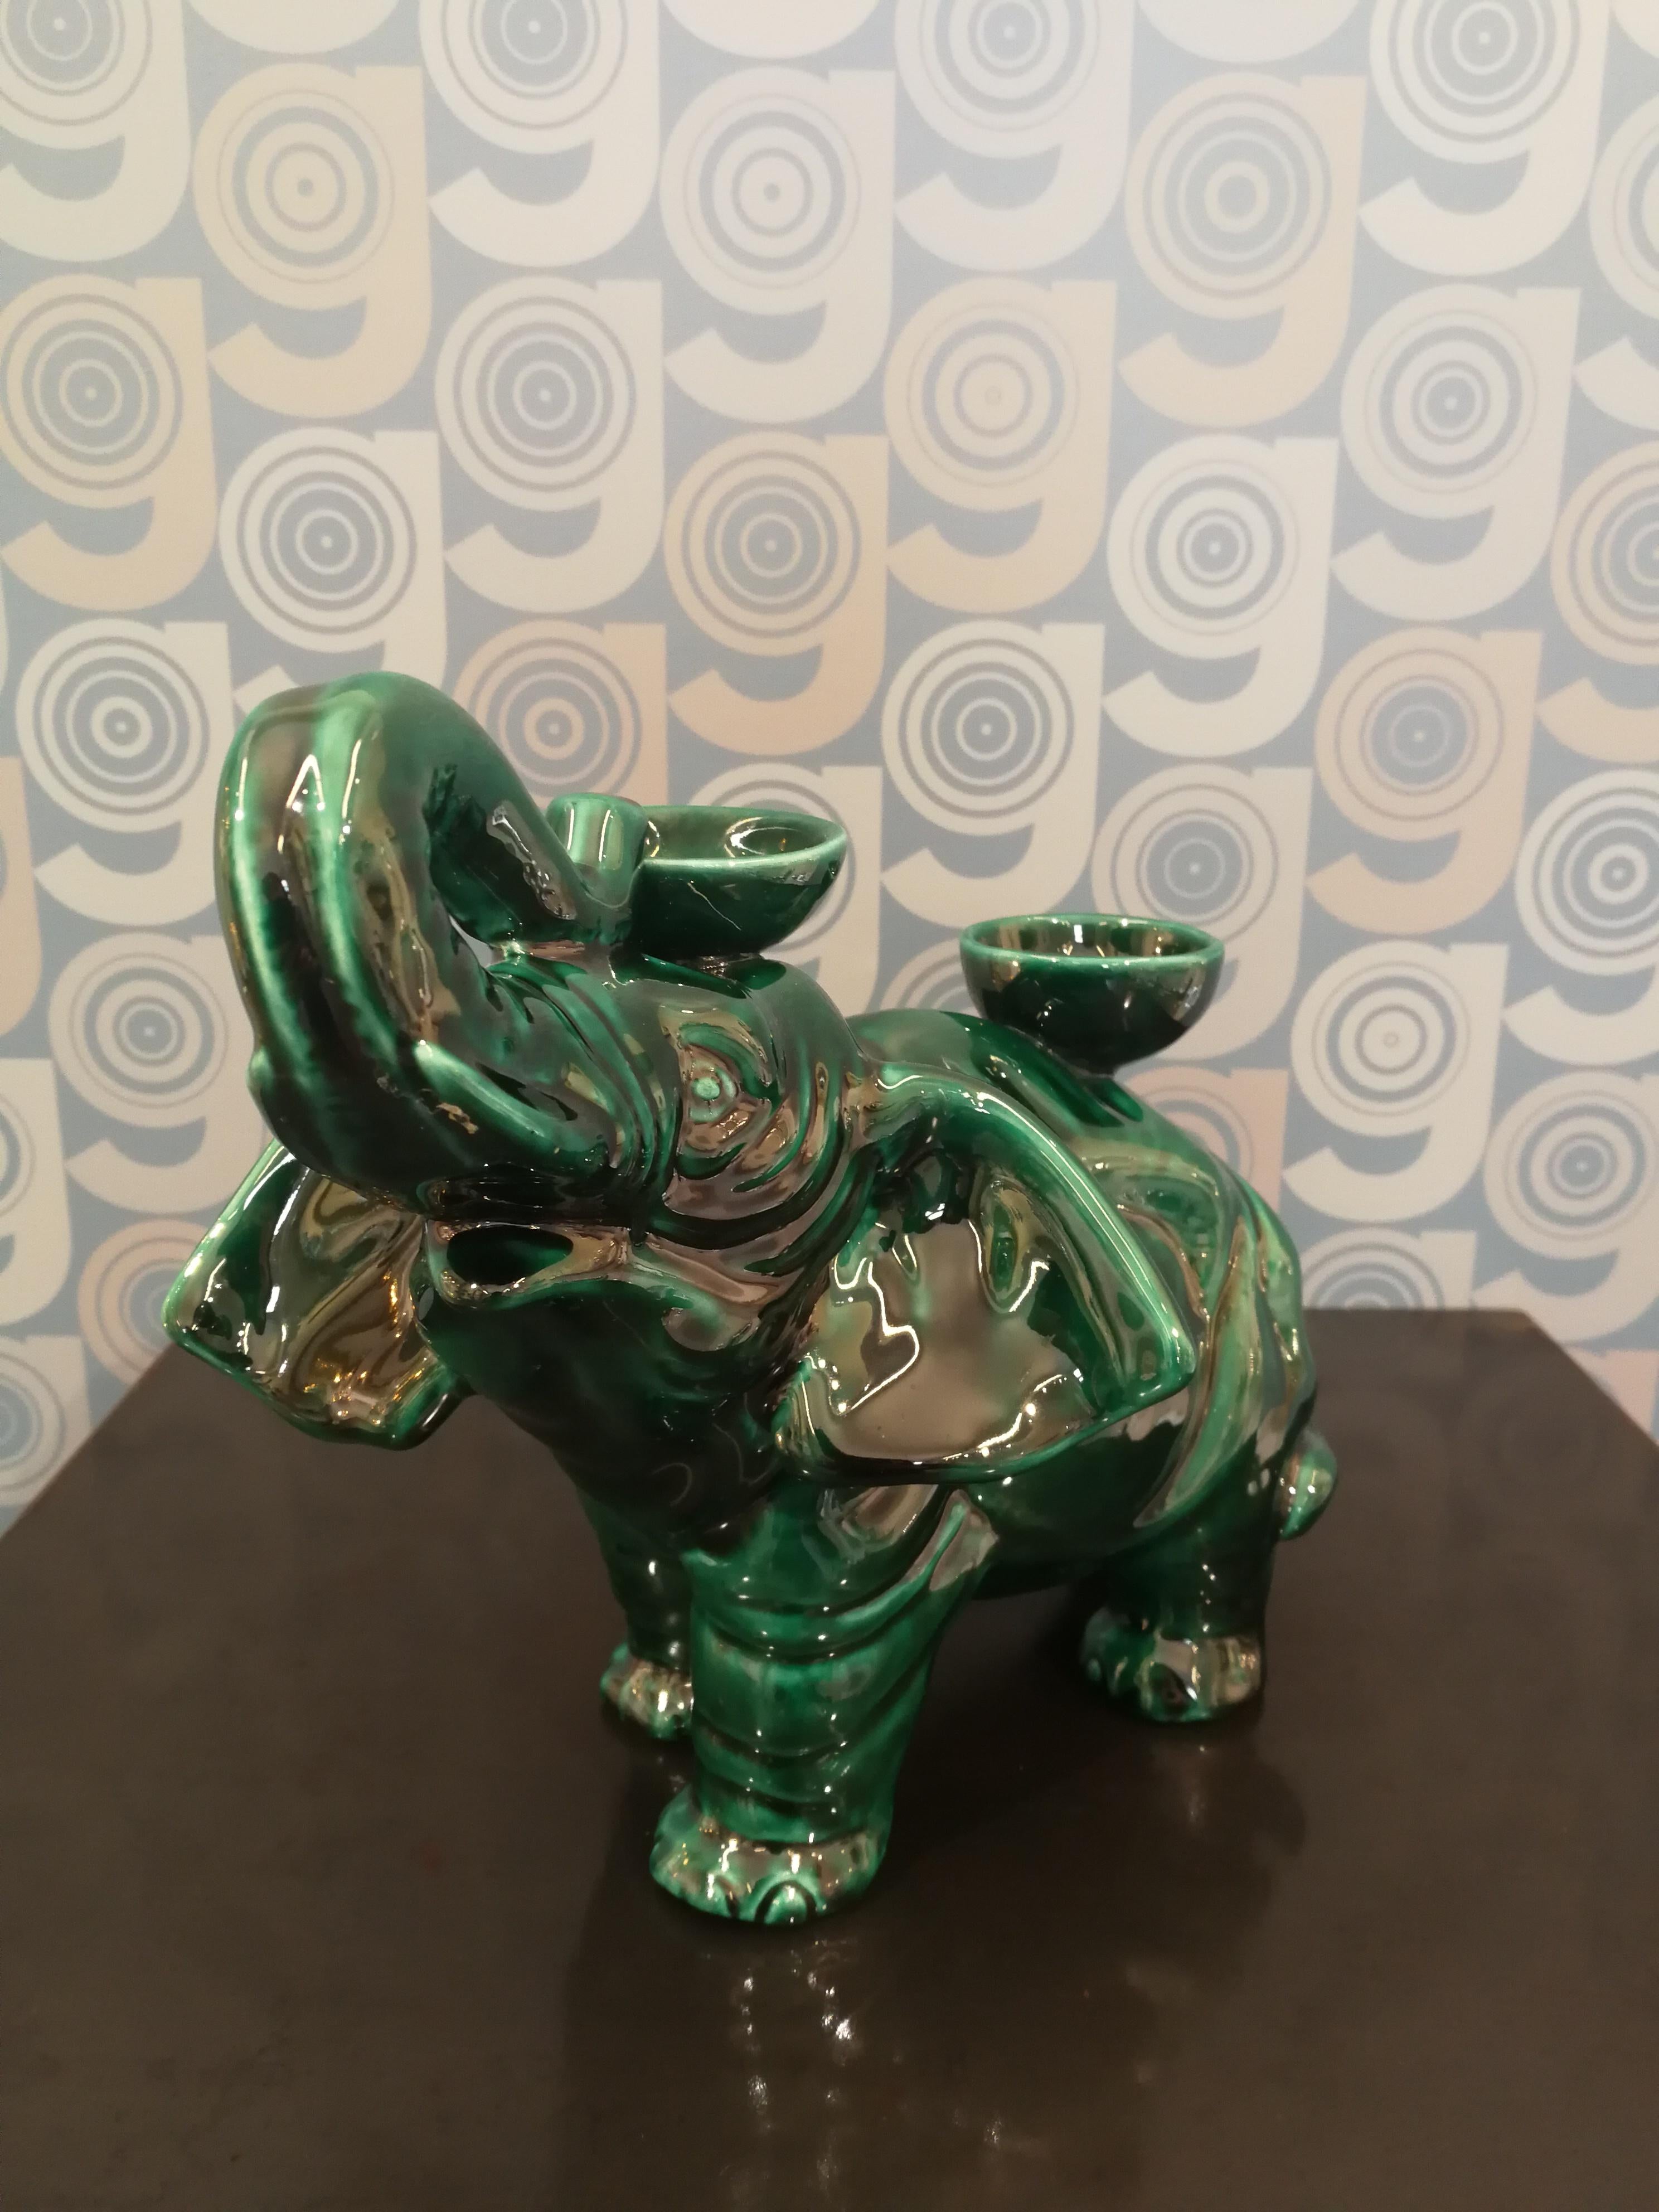 This elephant is part of an original collection of candle holder animals. The realization of the shape takes place through a mold with liquid clay; tiled and hand painted in a vast range of colours, from the most delicate pastels to the more